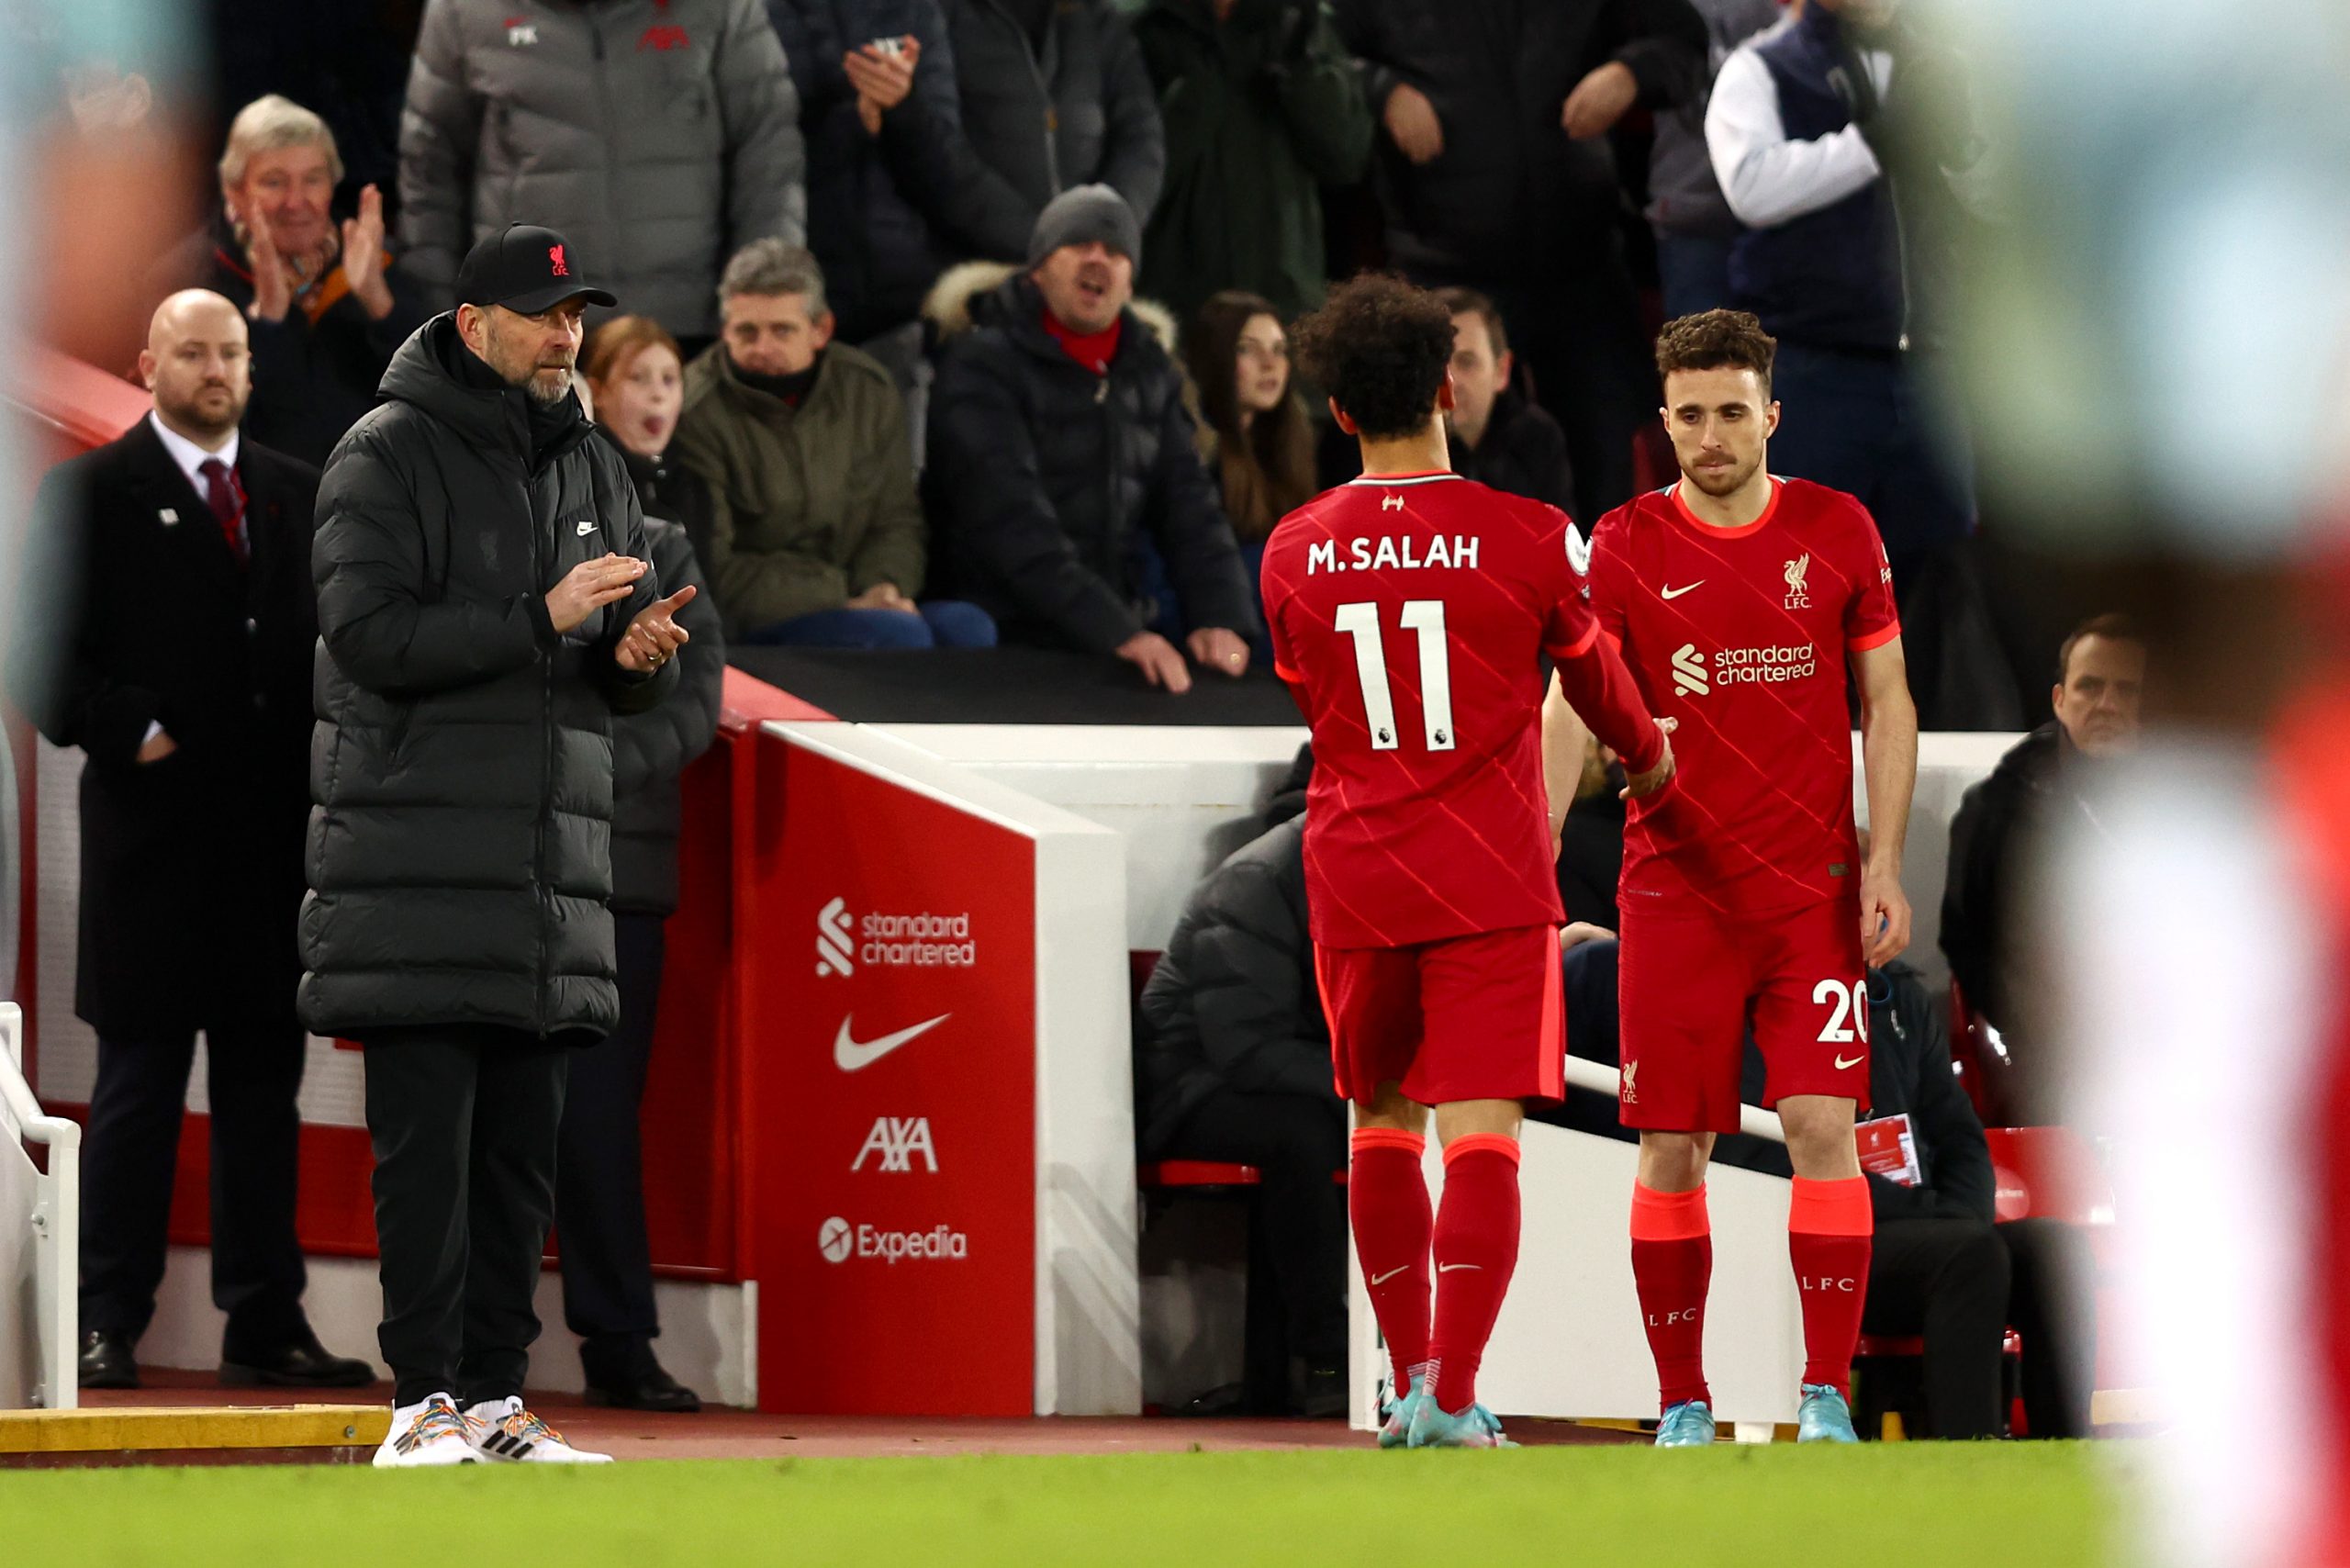 Liverpool winger Mo Salah is being replaced by Diogo Jota